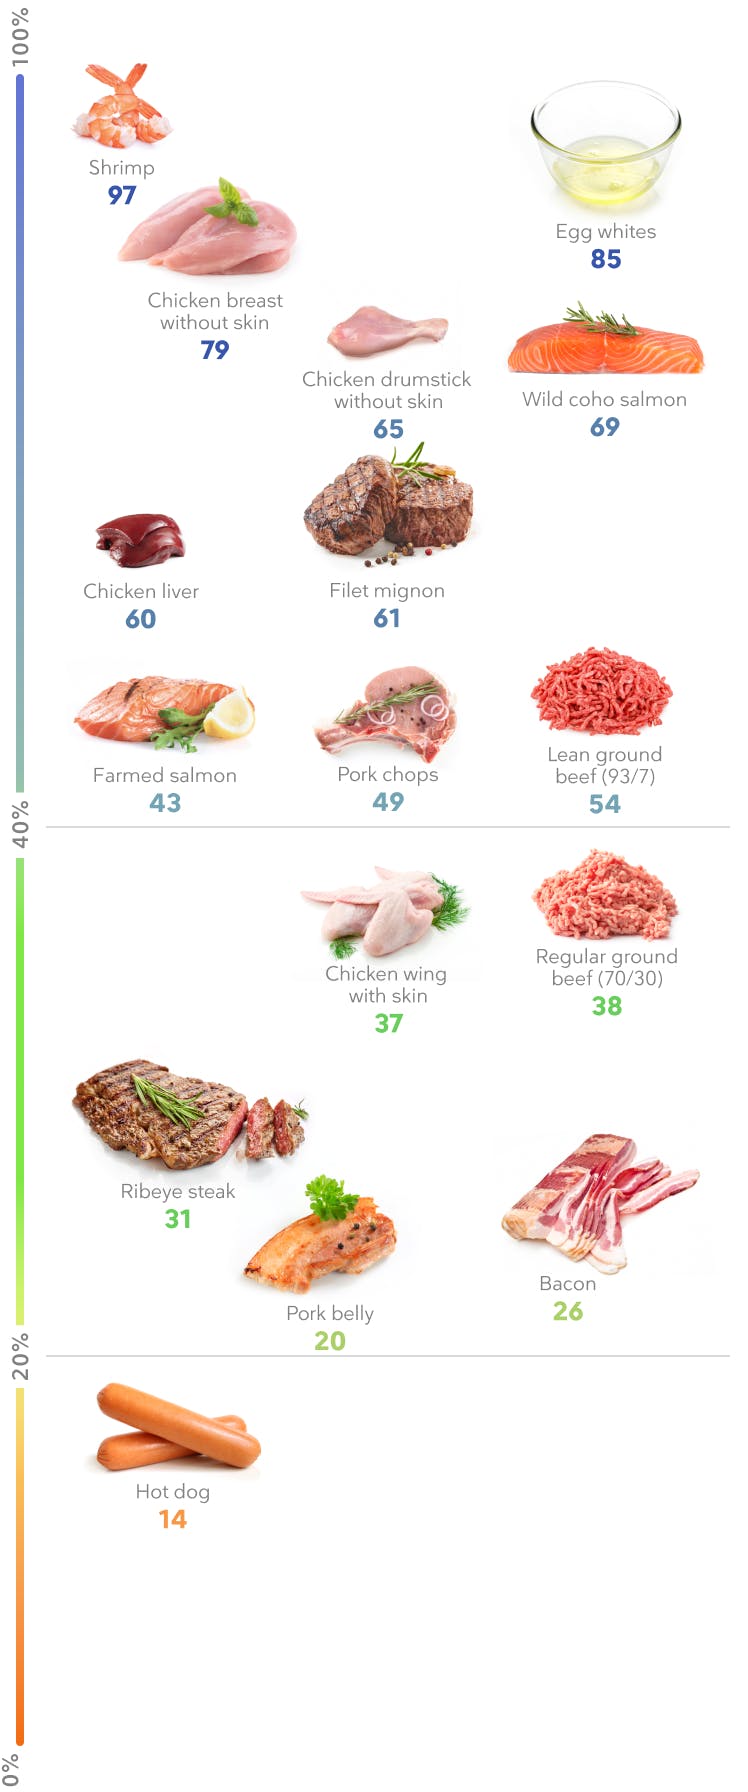 Healthy Meats to Eat: How to Pick the Best Beef, Pork, and Fish